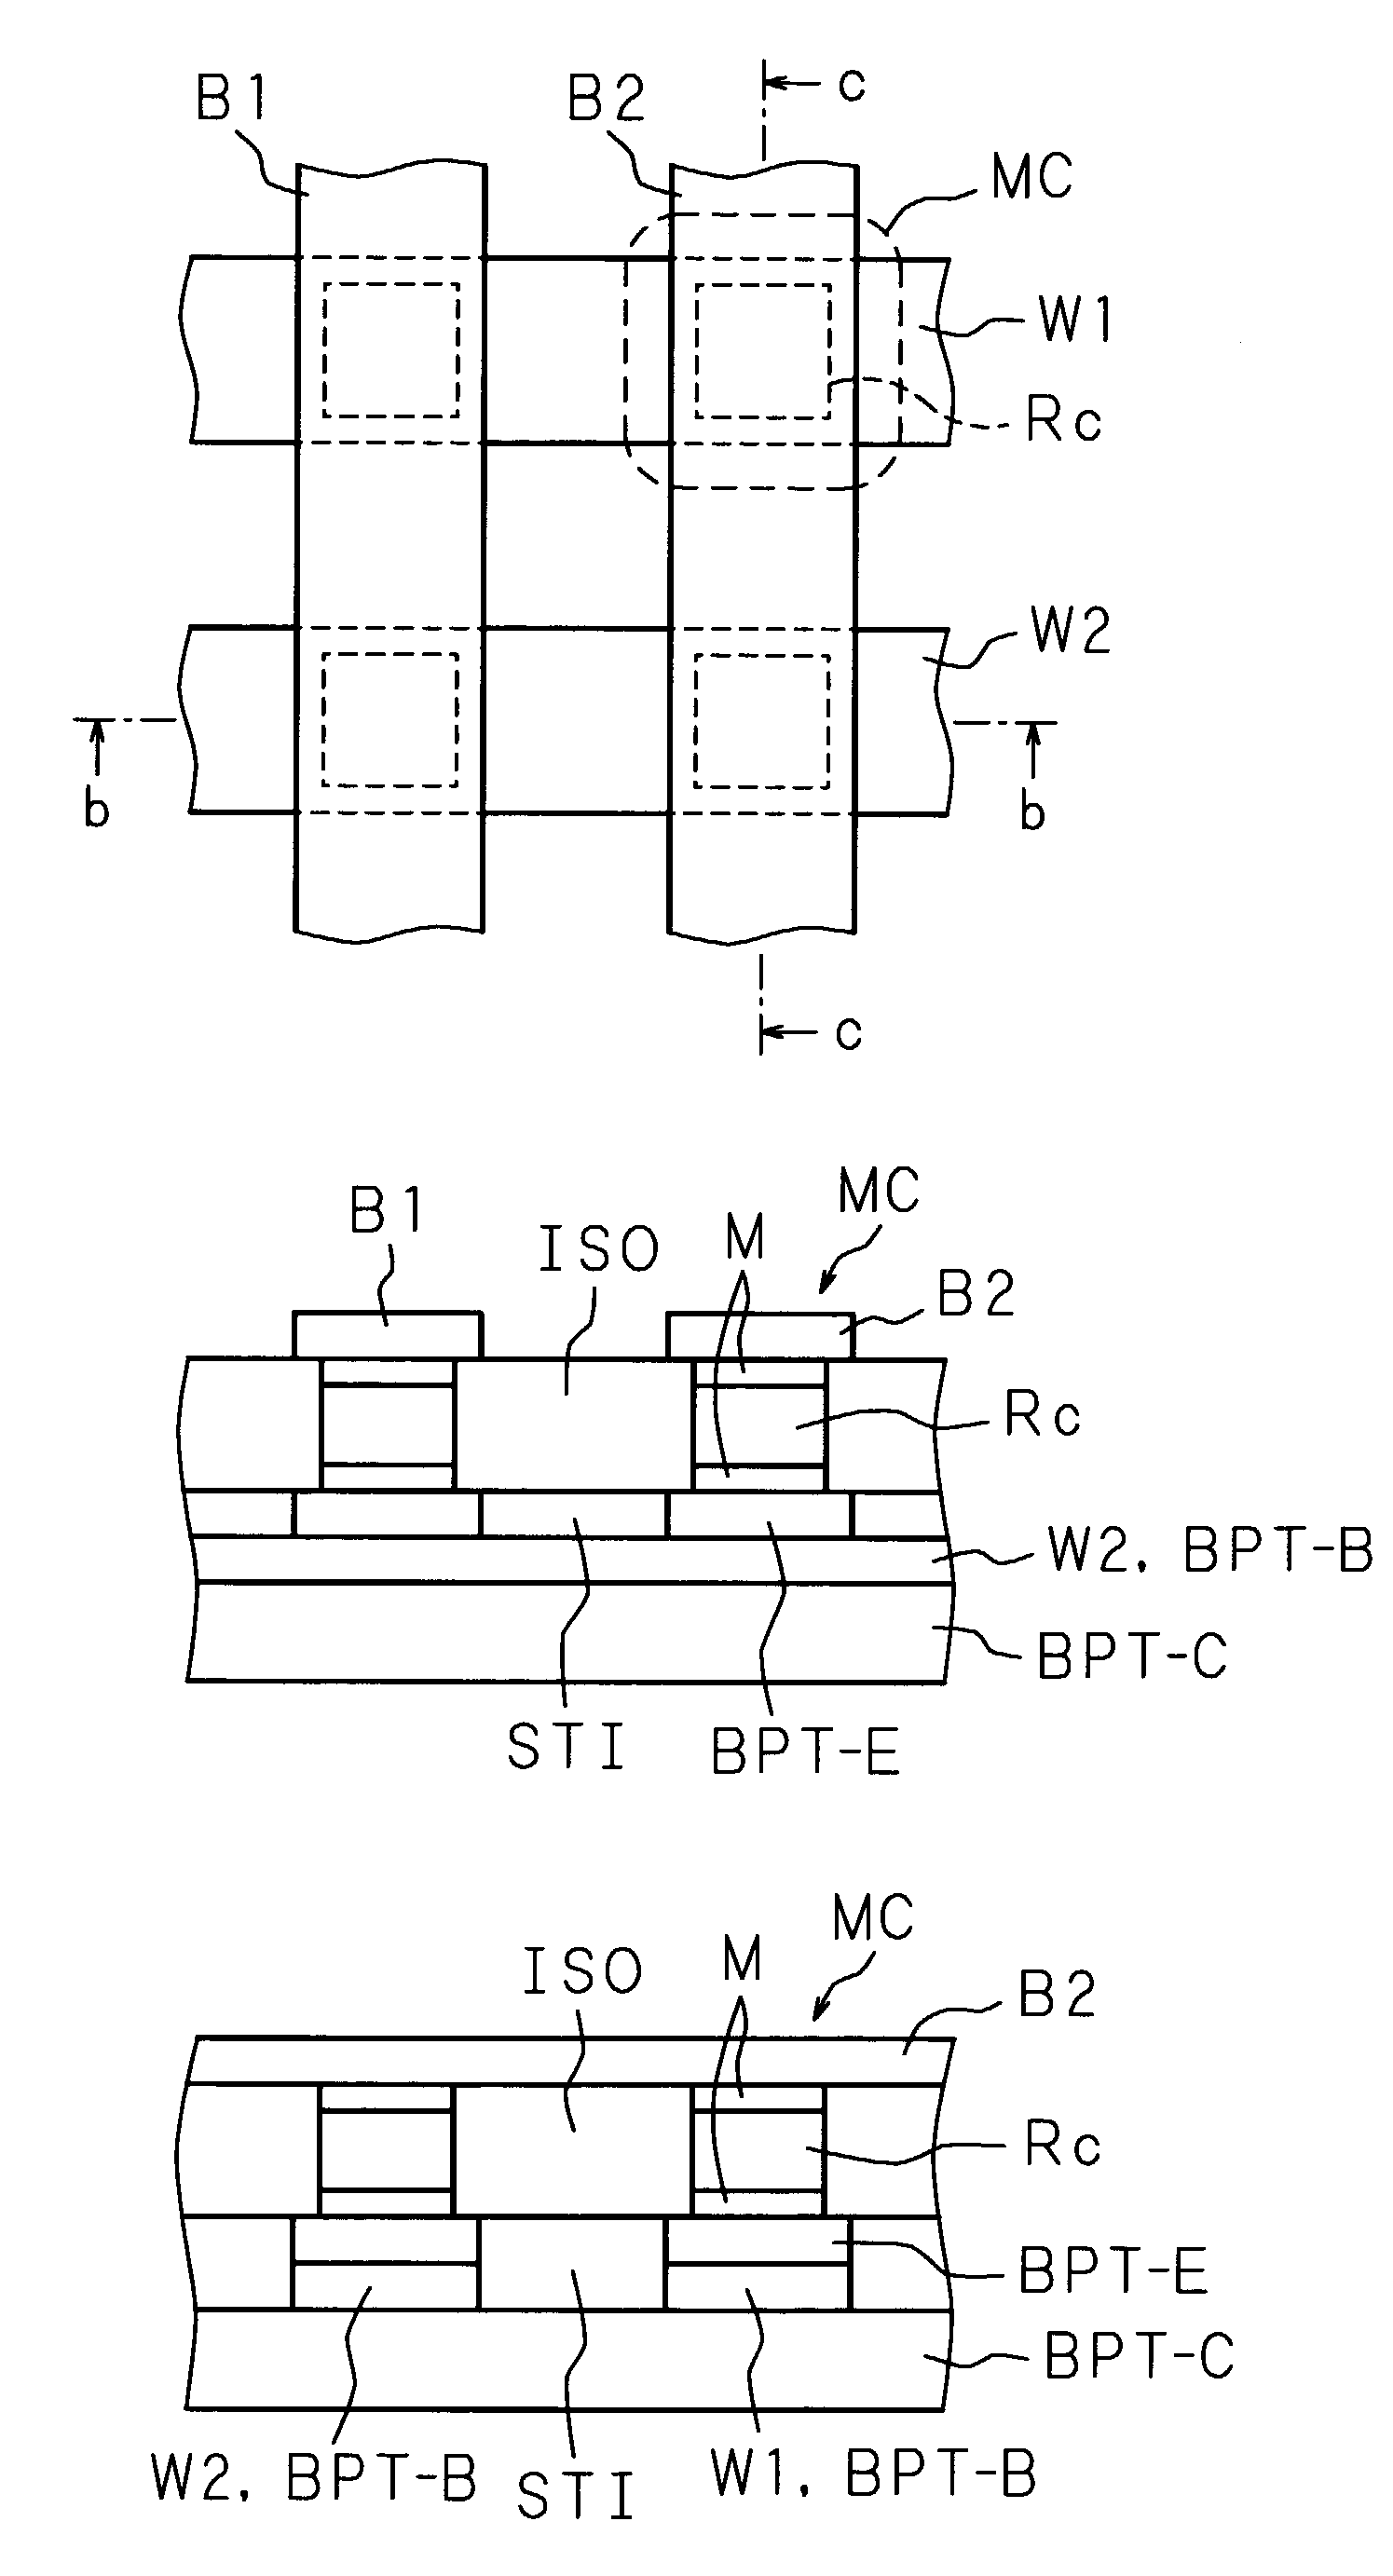 Memory cell with a perovskite structure varistor